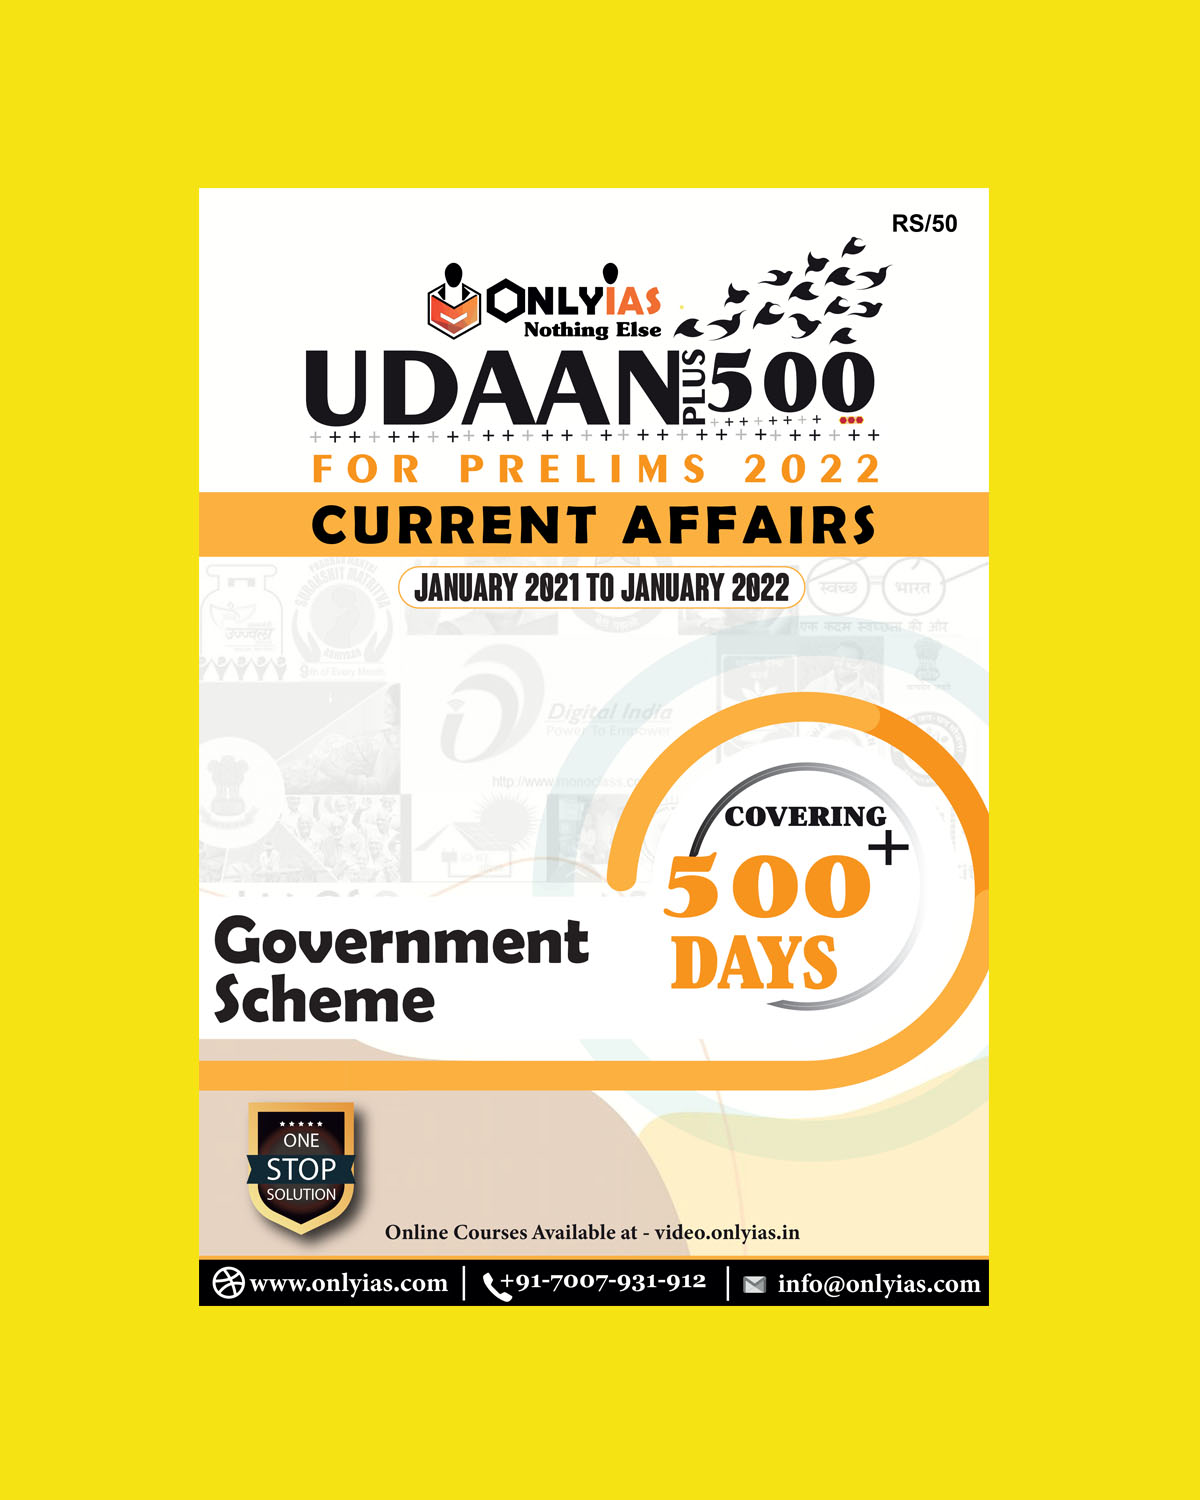 AFFAIRS　500　2021　SCHEME　ONLY　FOR　IAS　CURRENT　PRELIMS　UDAAN　JANUARY　TO　PLUS　GOVERNMENT　2022　2022　DAYS　Imagerunners　(JANUARY　2022)　COVERING　500　(BLACK　WHITE)